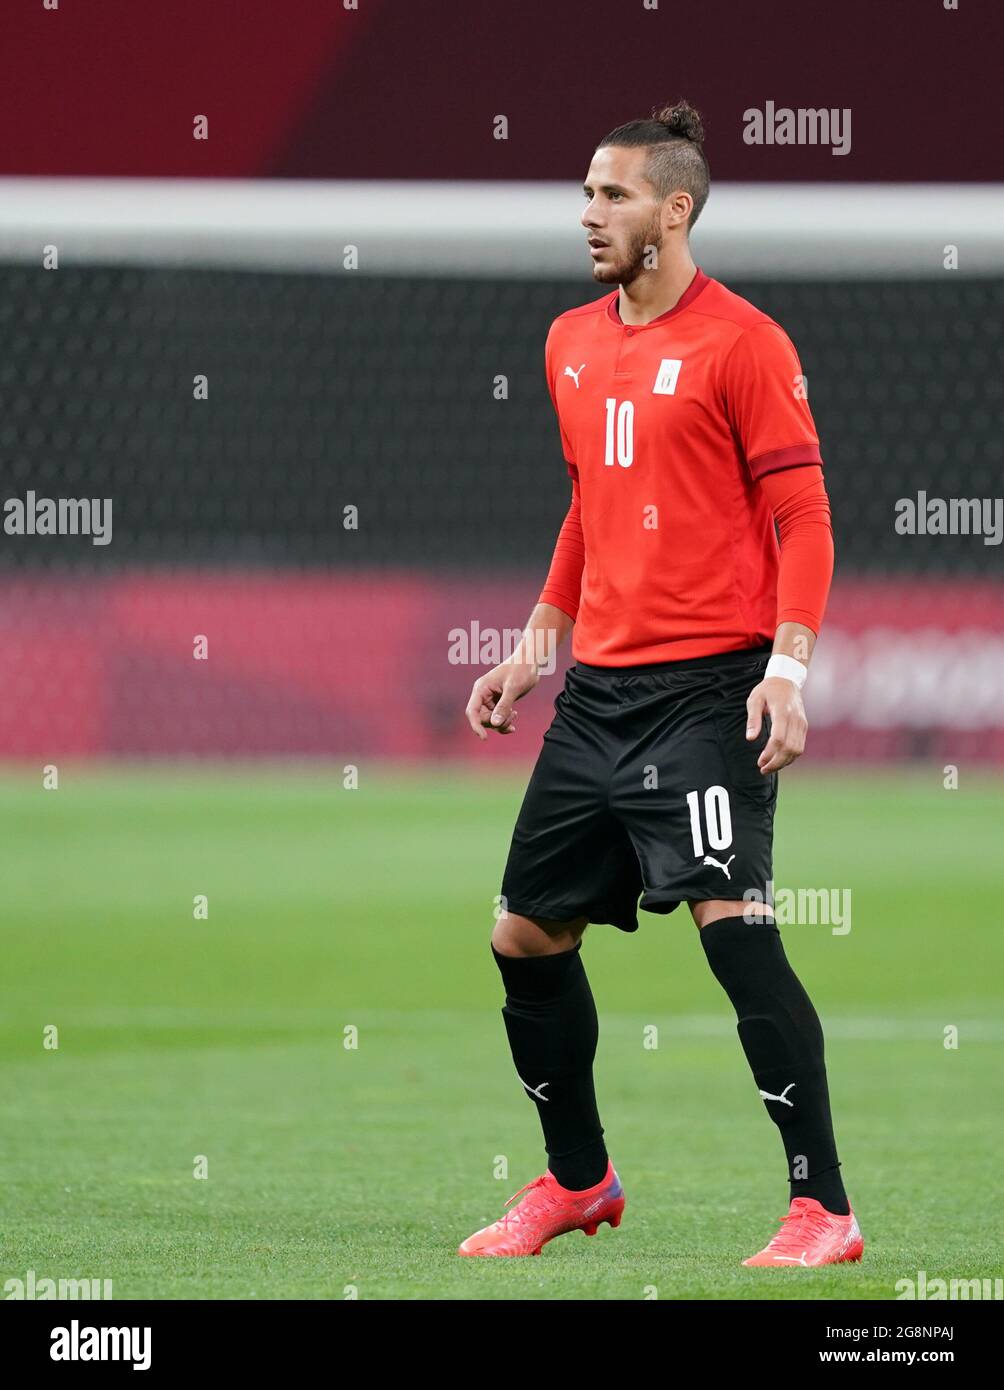 Sapporo, Japan. 22nd July, 2021. Ramadan Sobhi (10 Egypt) in aciton during the Men's Olympic Football Tournament Tokyo 2020 match between Egypt and Spain at Sapporo Dome in Sapporo, Japan. Credit: SPP Sport Press Photo. /Alamy Live News Stock Photo